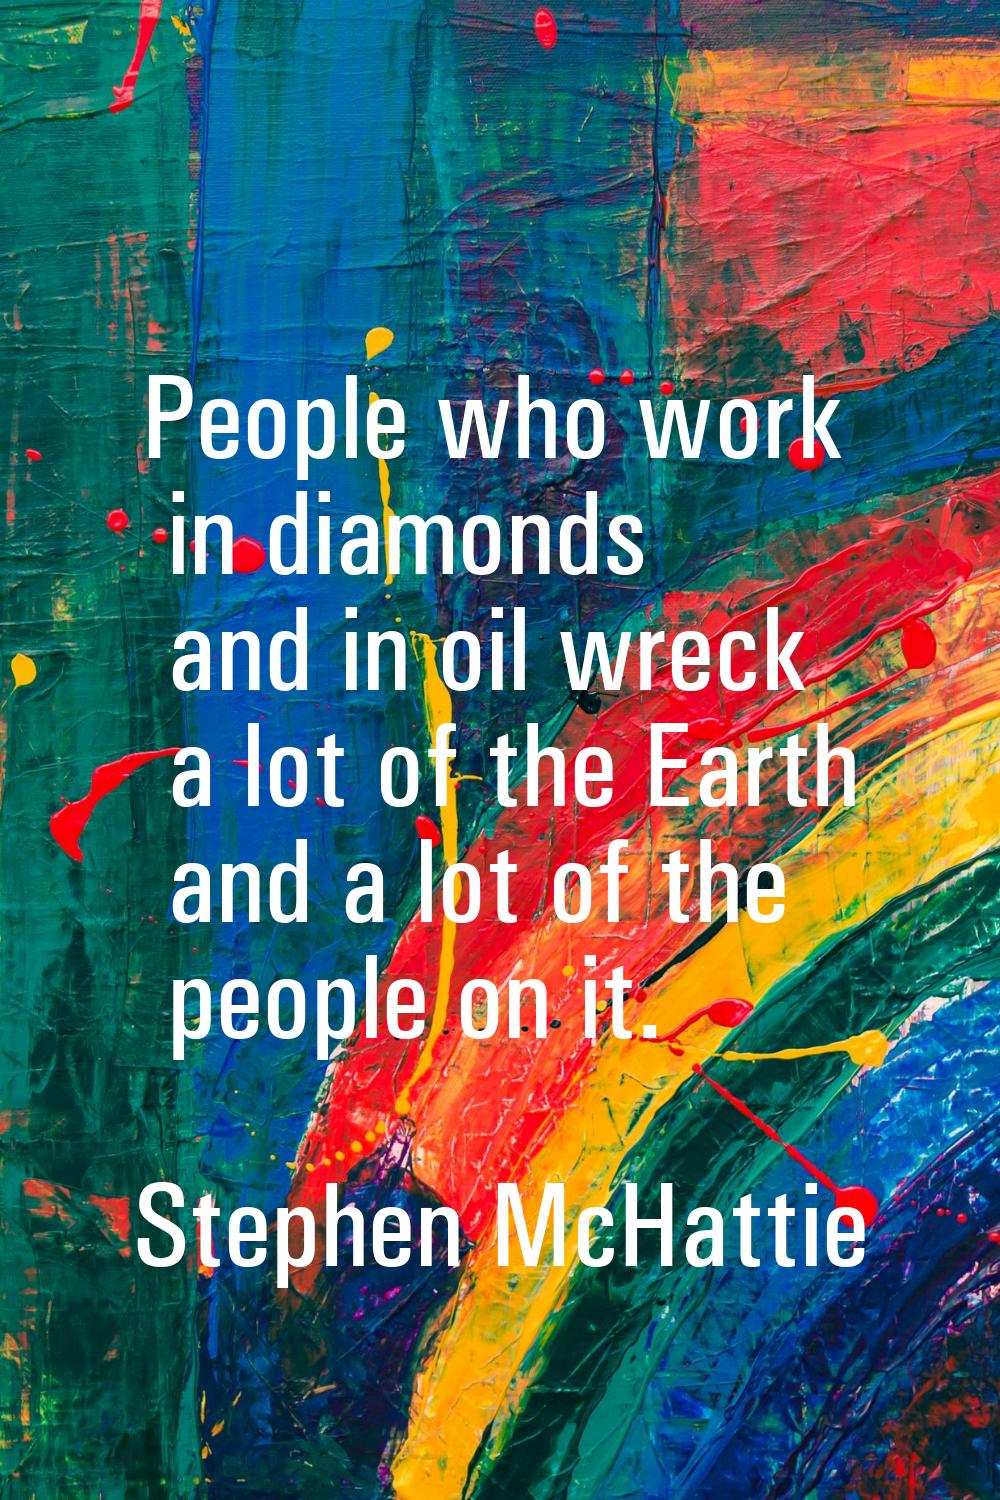 People who work in diamonds and in oil wreck a lot of the Earth and a lot of the people on it.